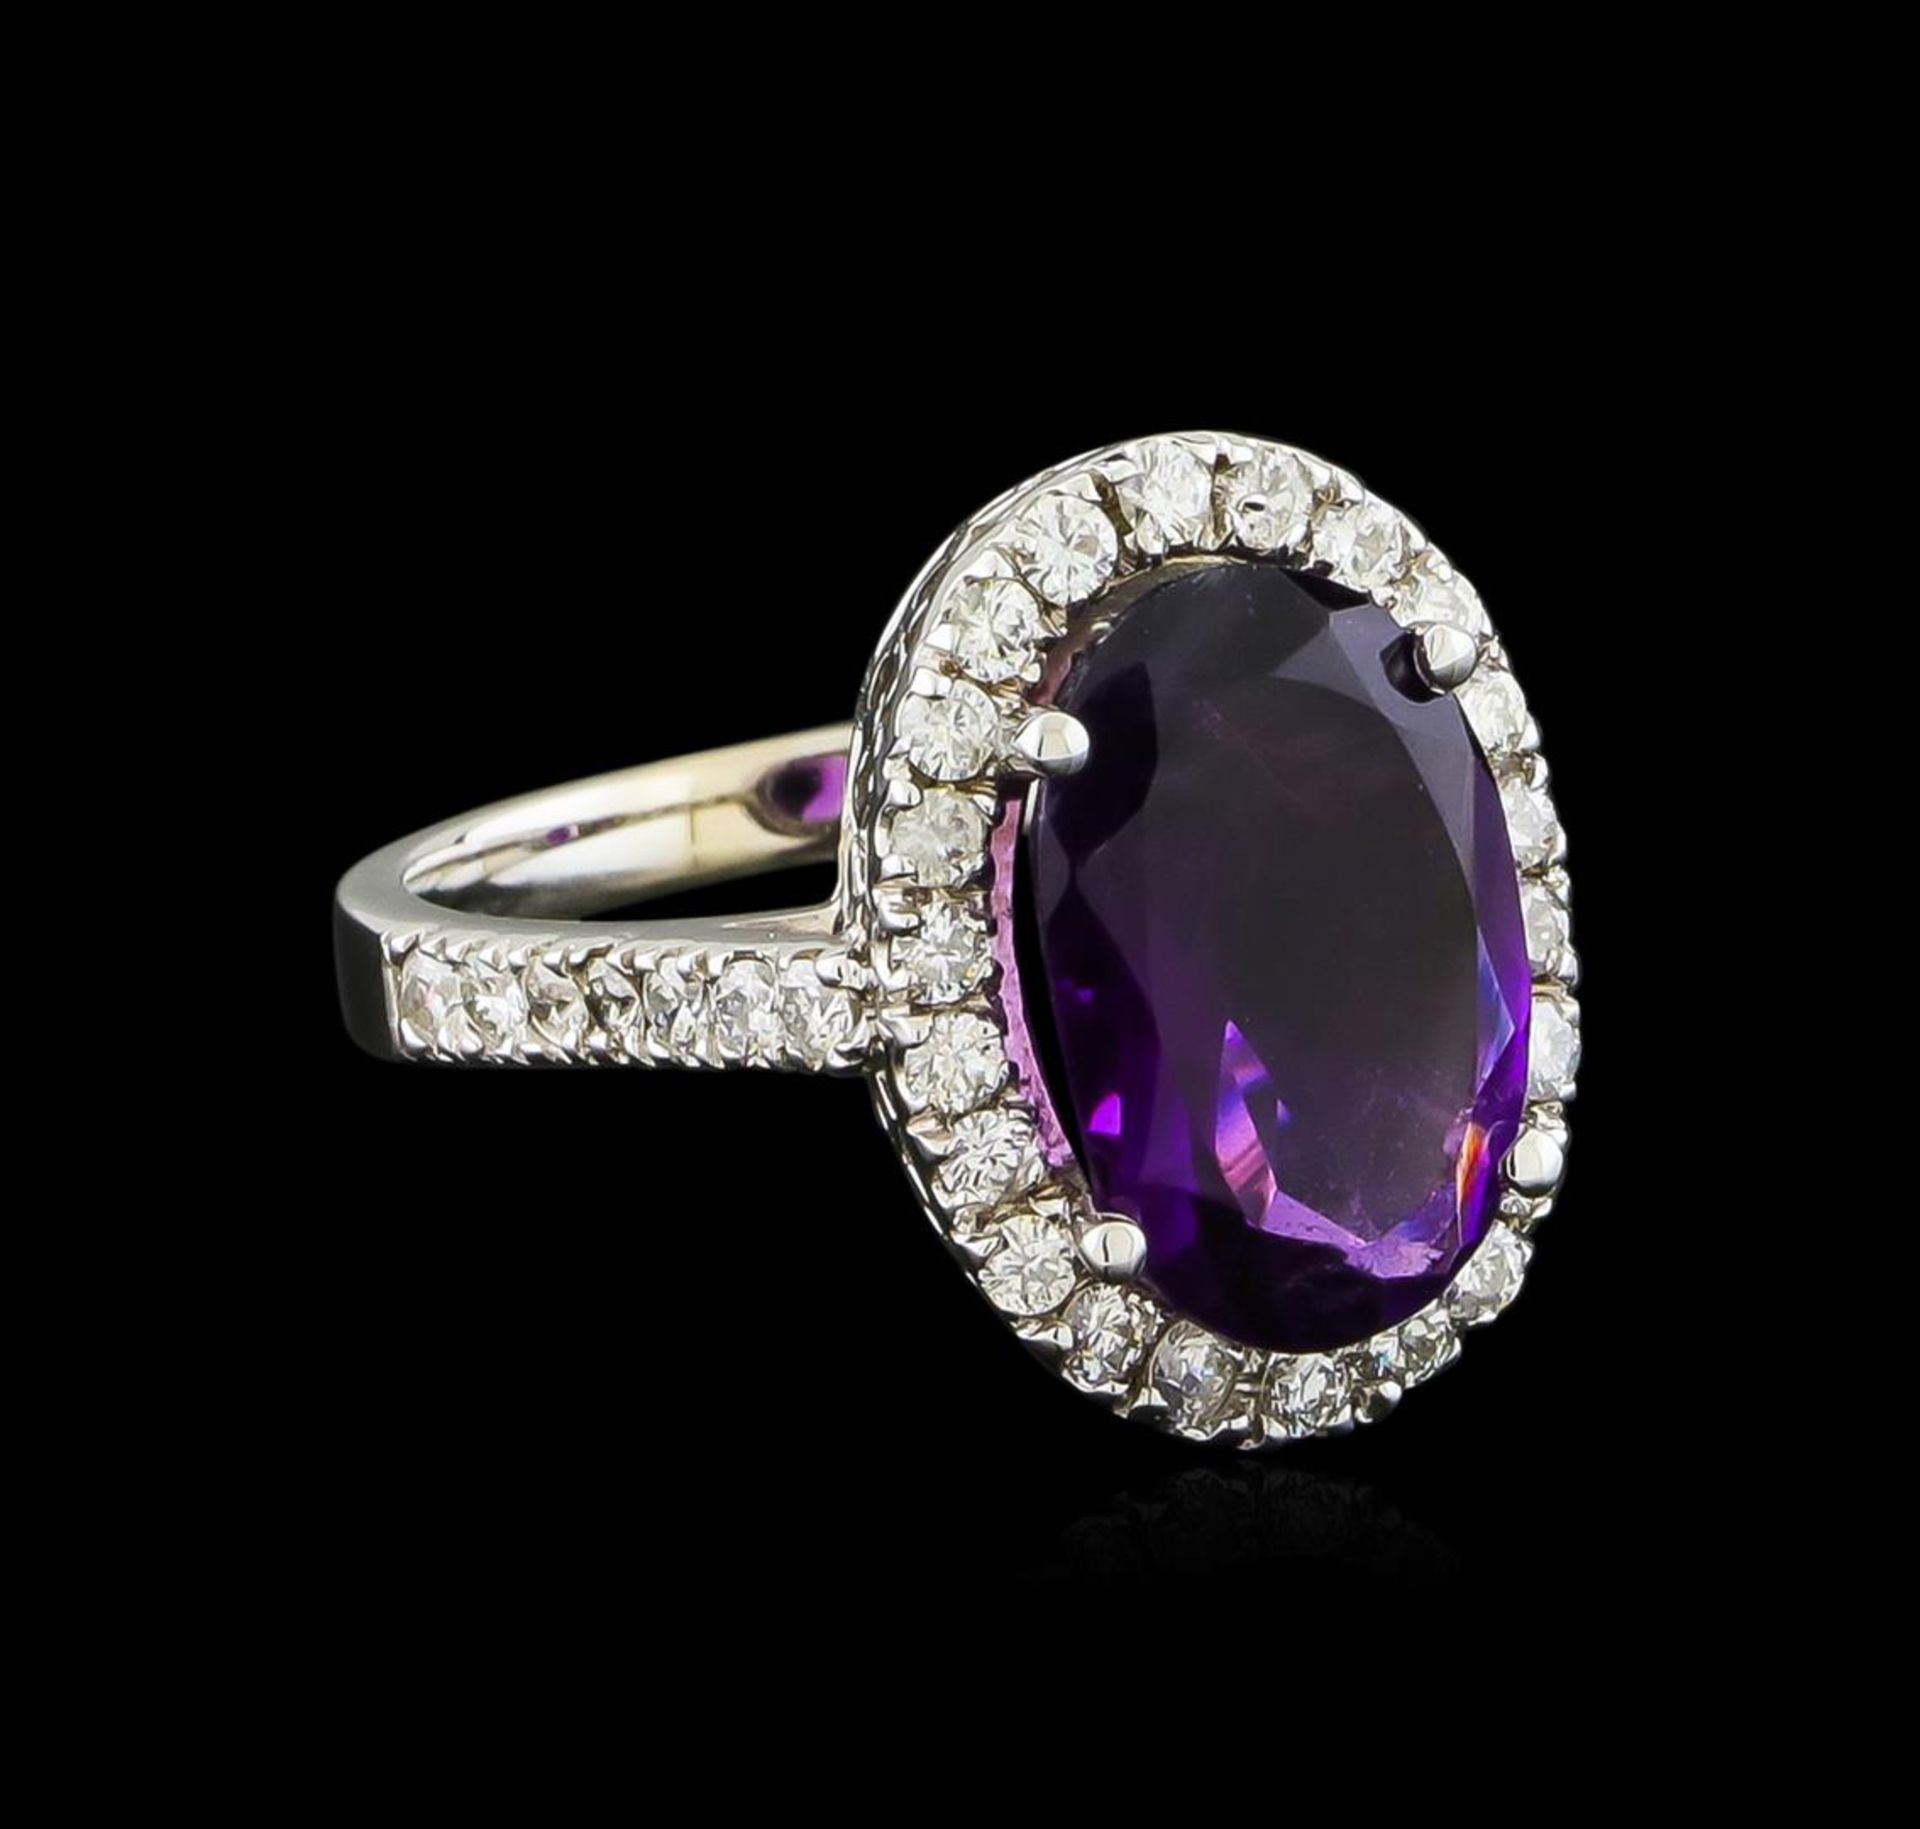 3.58ct Amethyst and Diamond Ring - 14KT White Gold